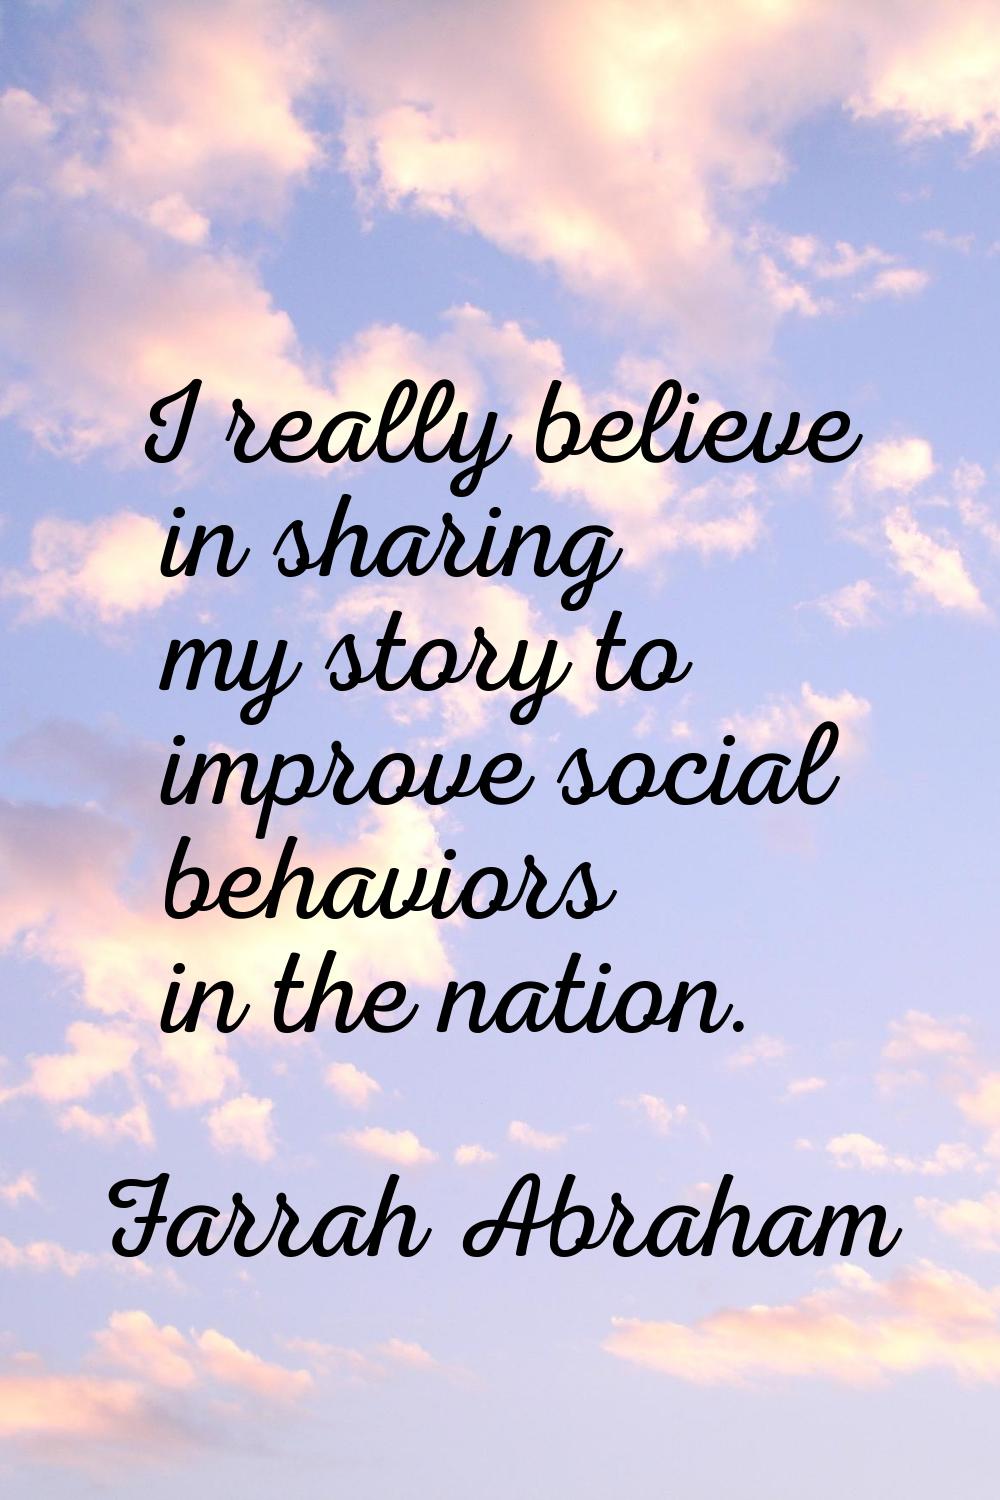 I really believe in sharing my story to improve social behaviors in the nation.